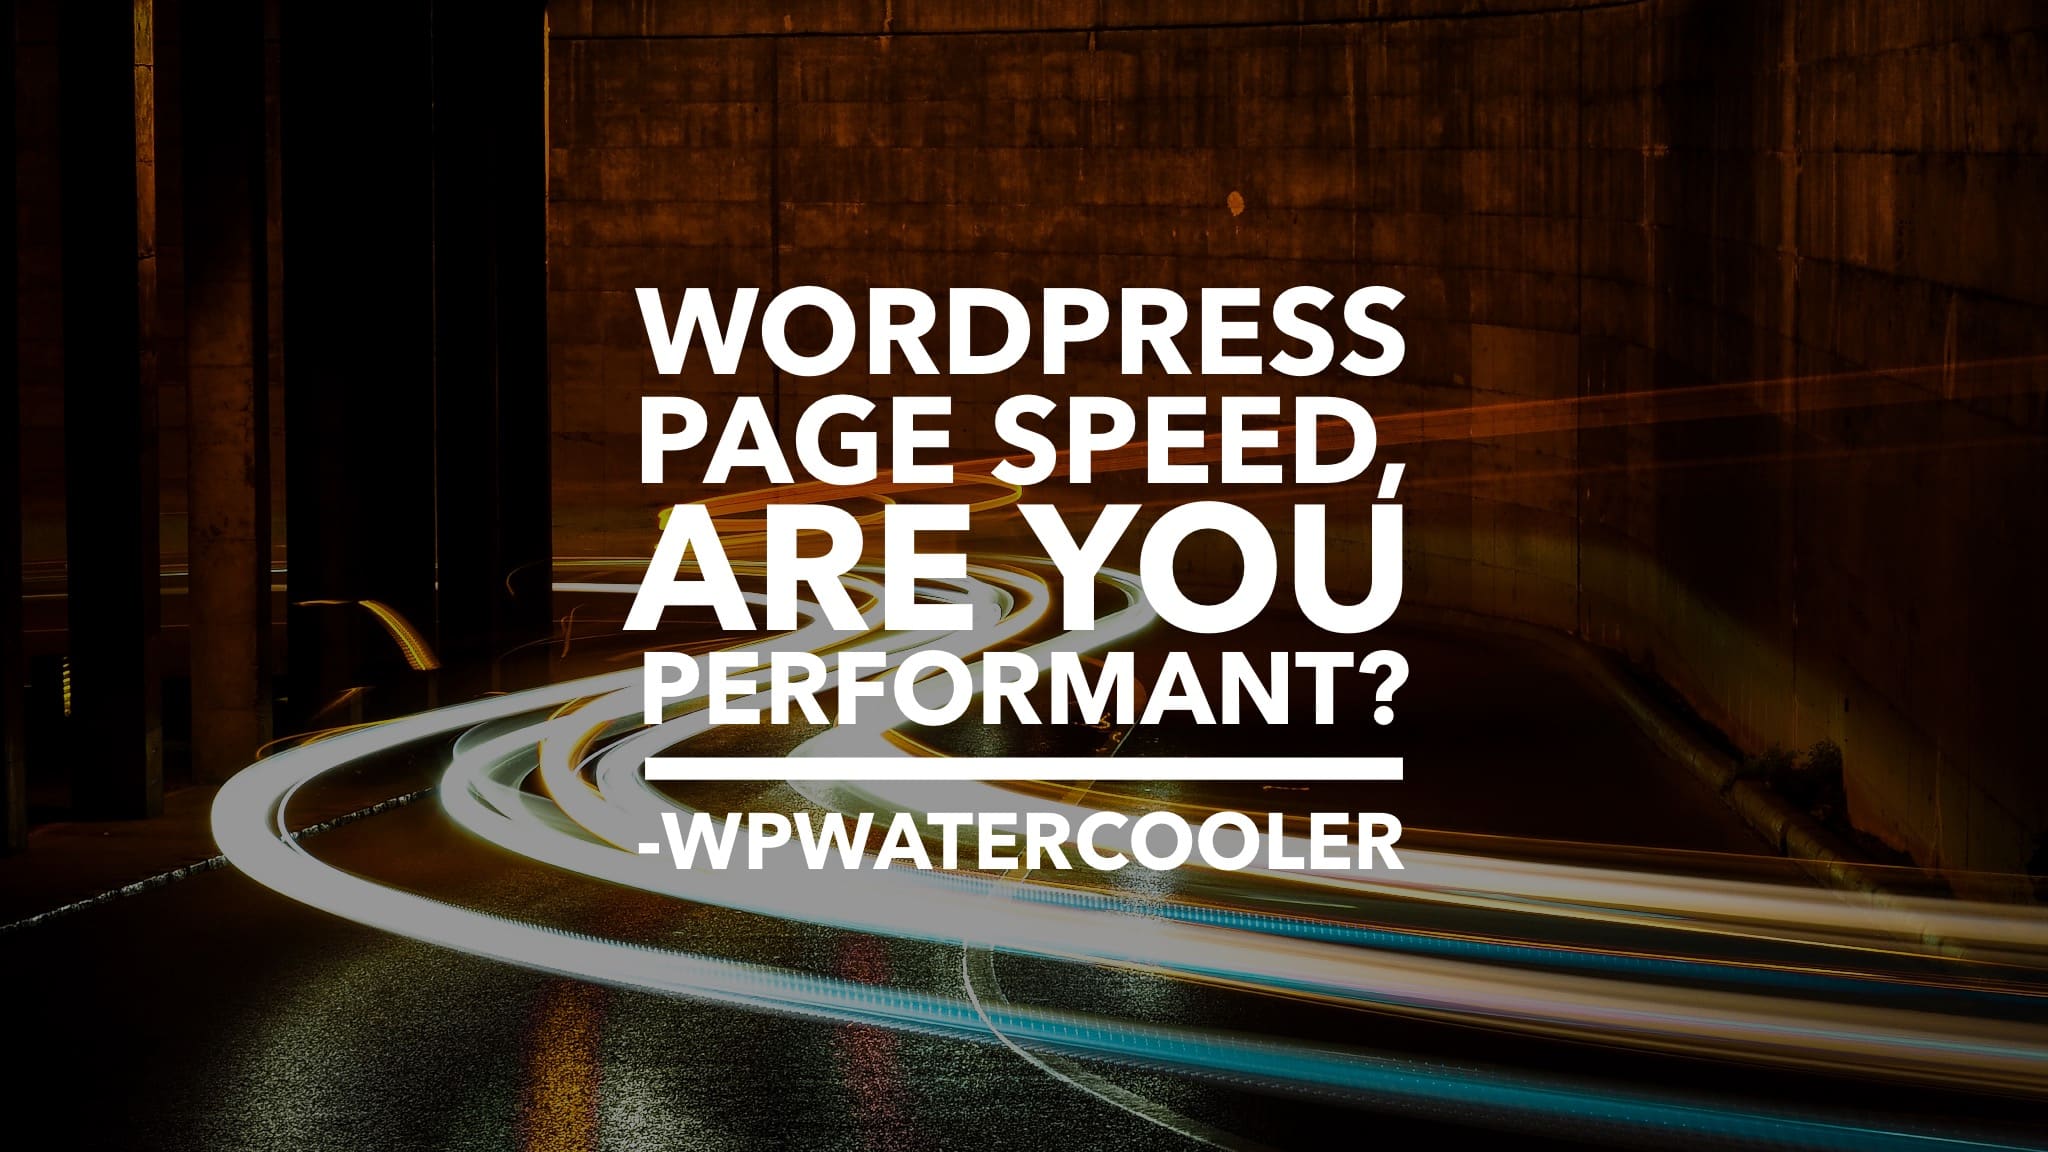 EP338 - WordPress Page Speed, are you performant?